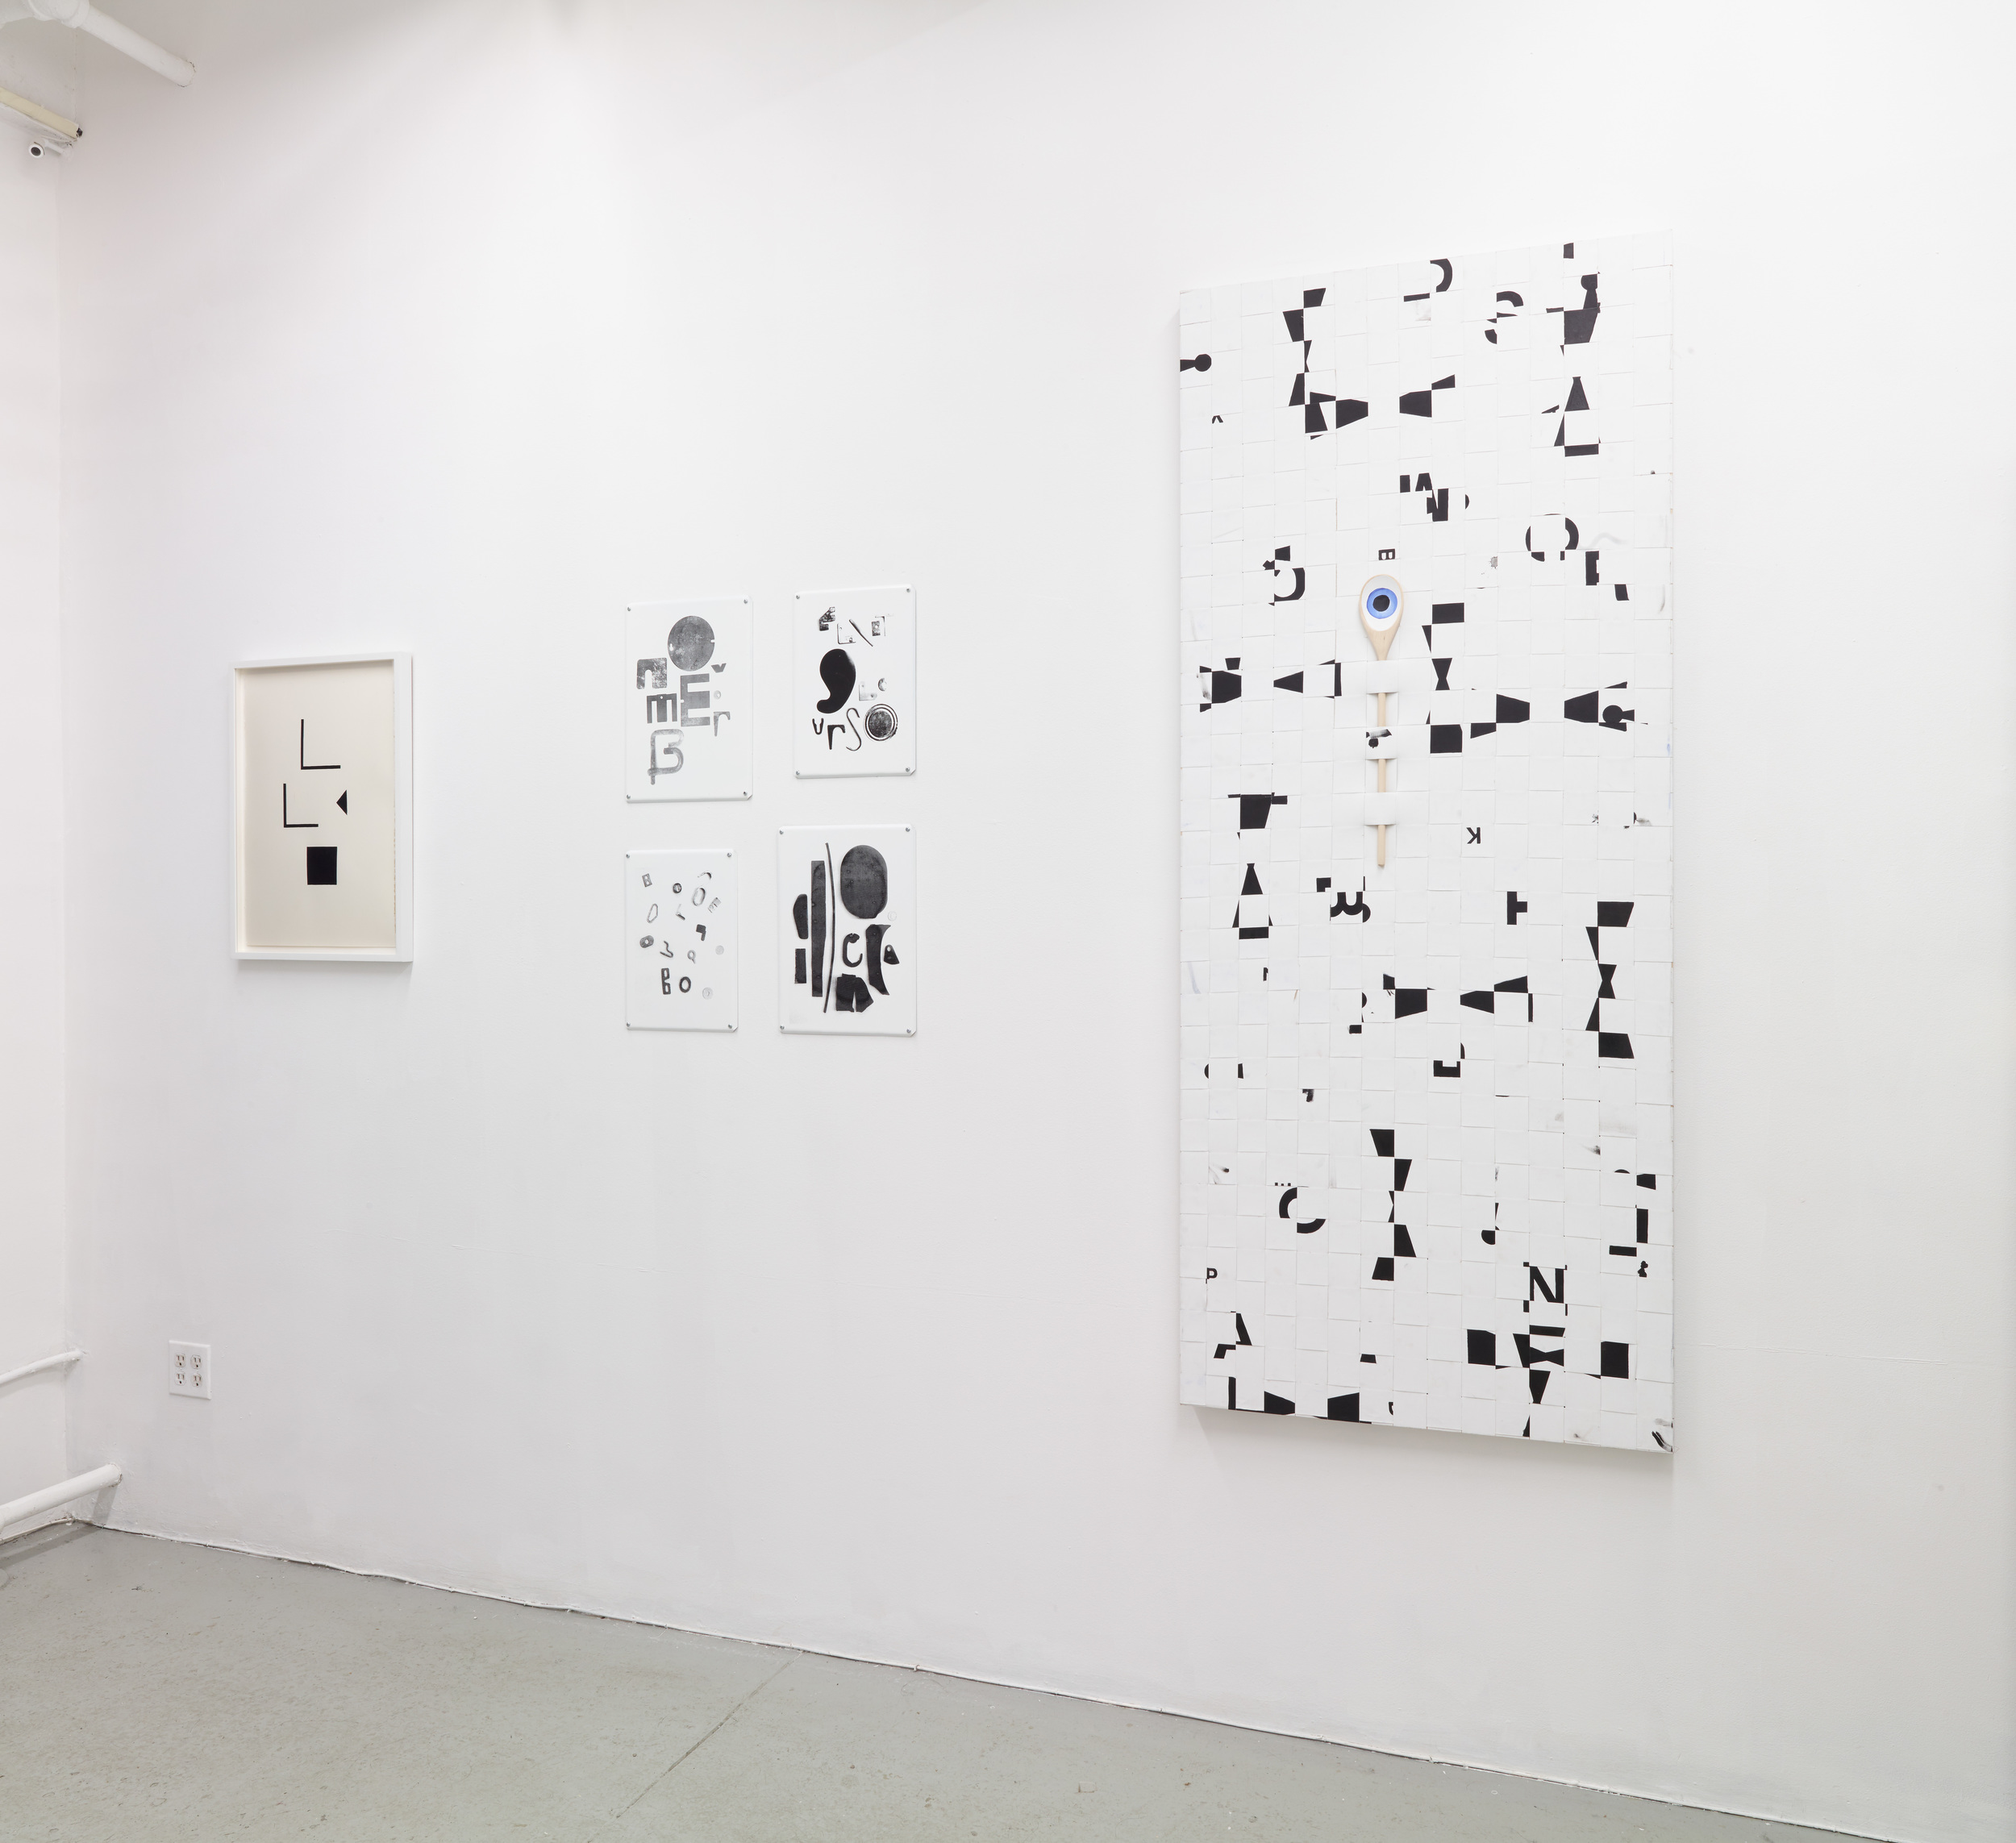 Installation view of 'Two Different Ways to Do Two Different Things' curated by Susanna Callegari